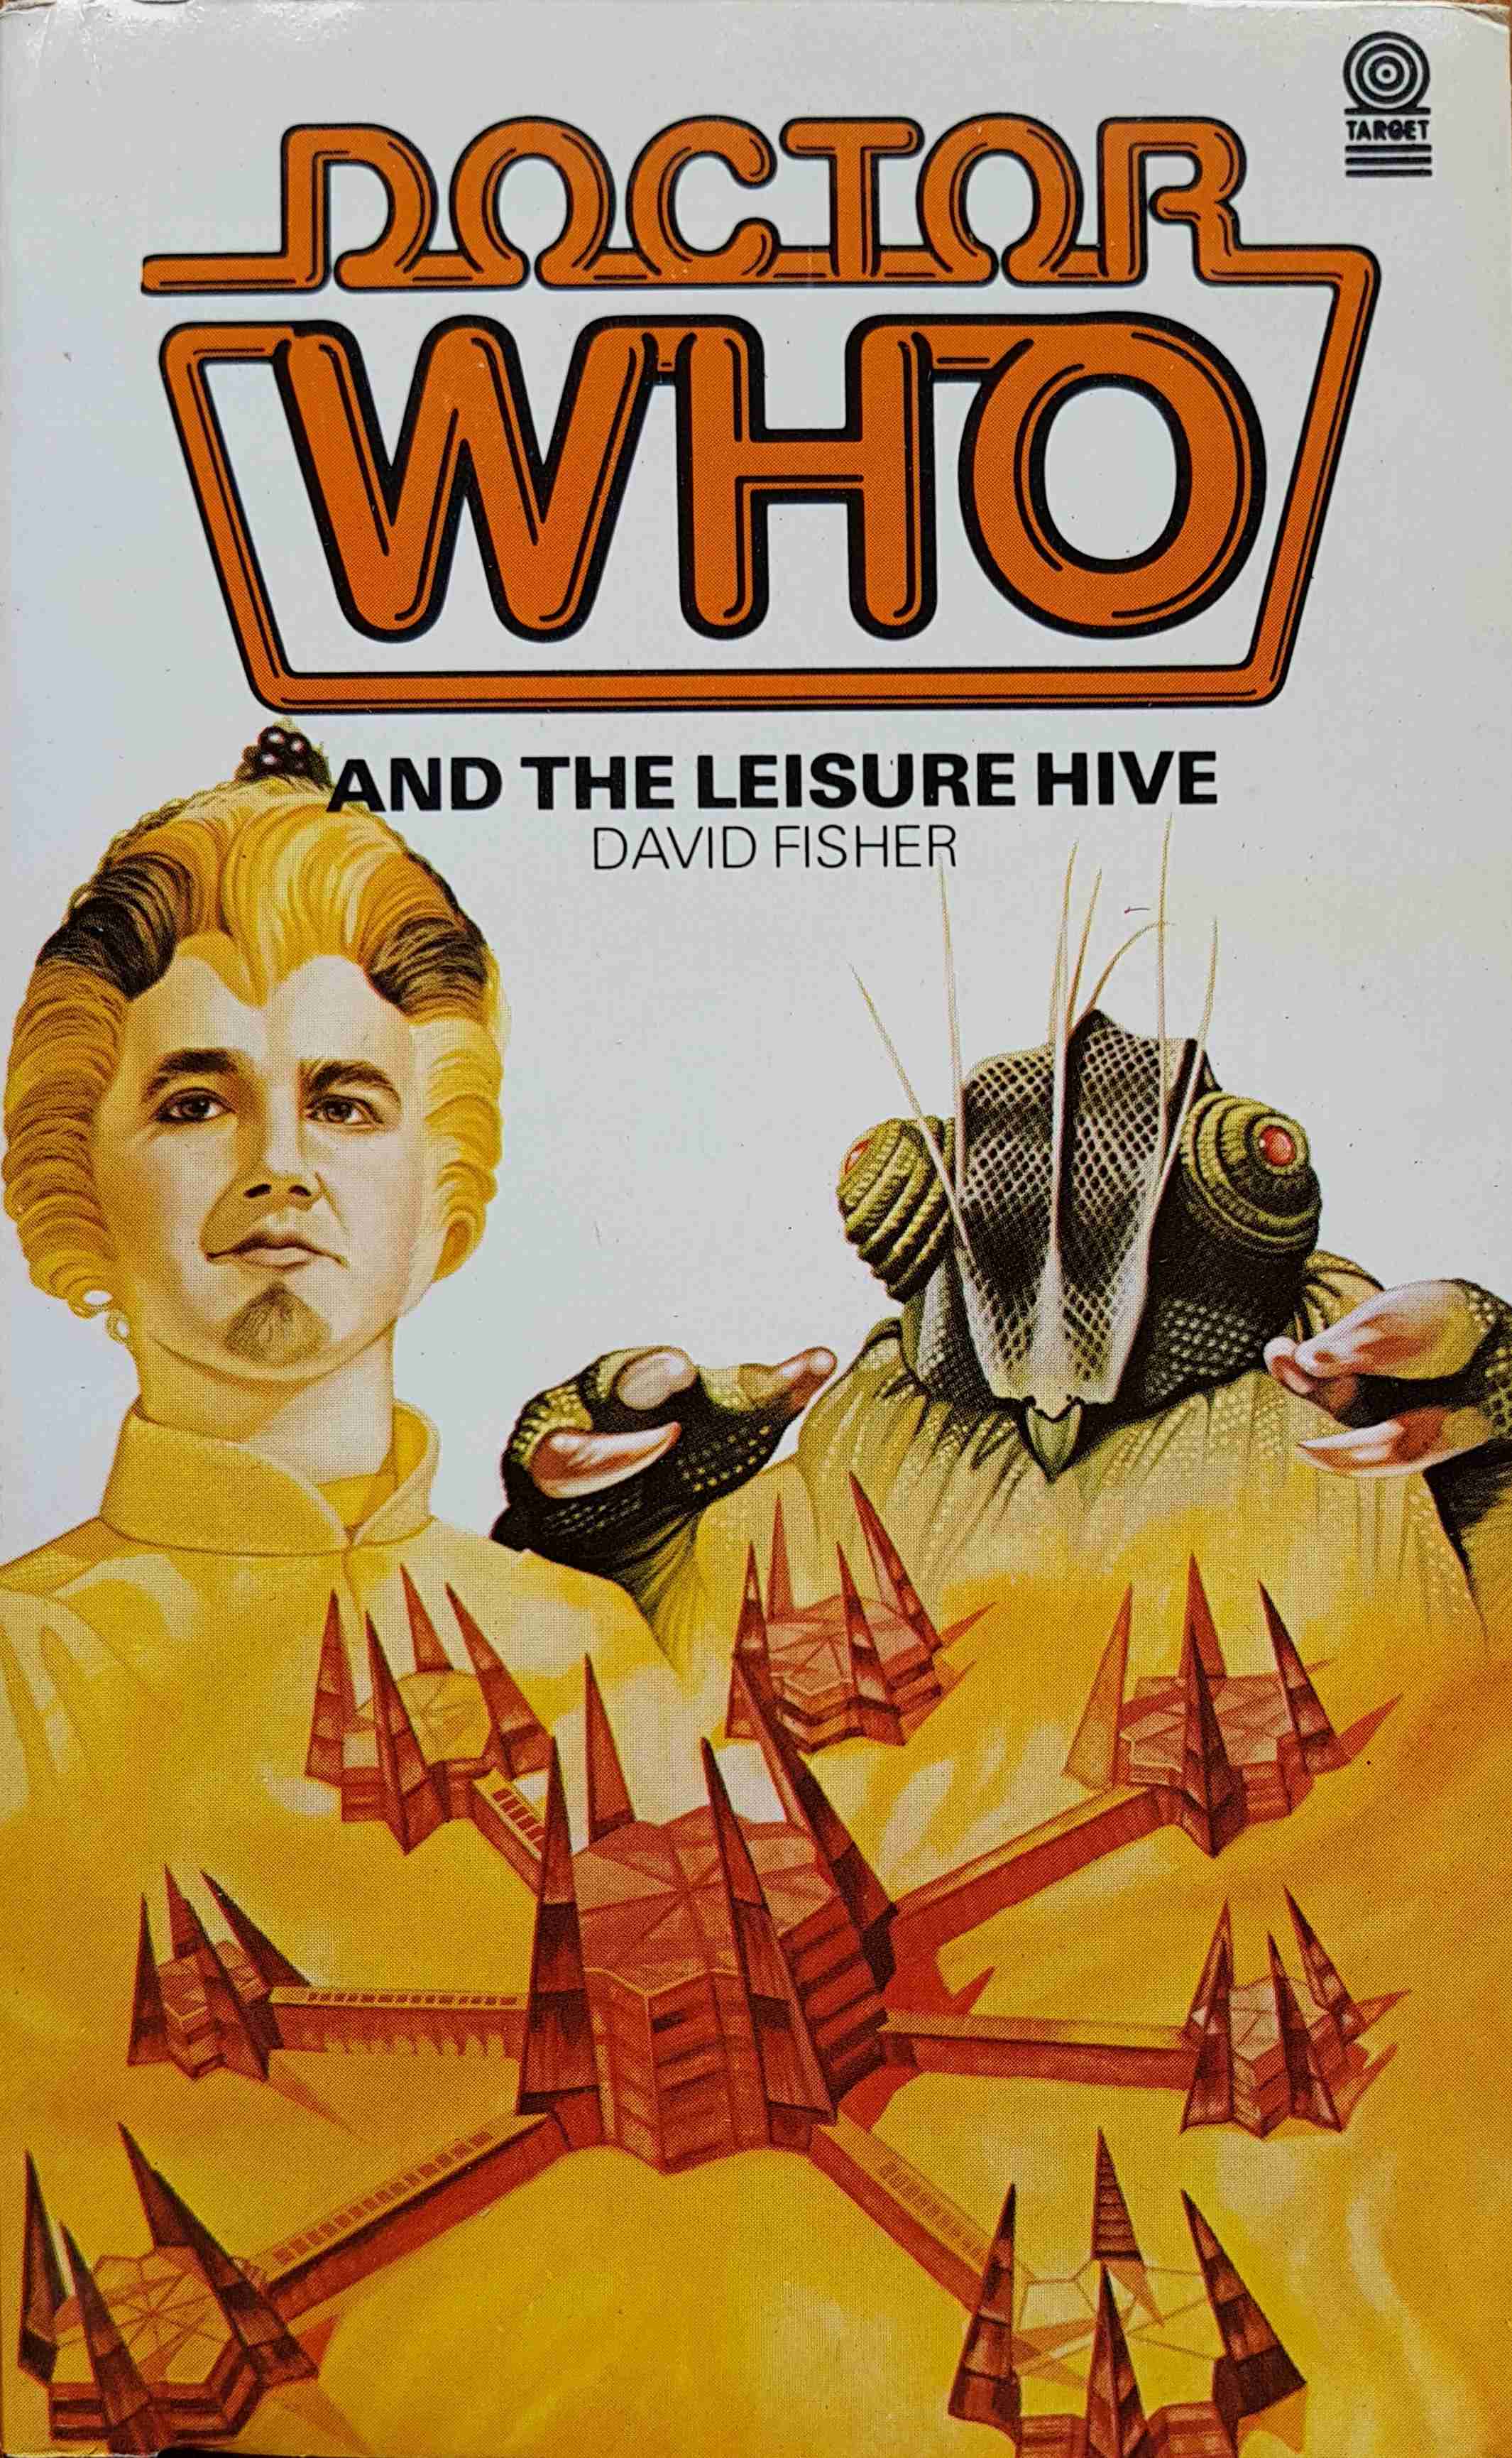 Picture of 0-426-20147-7 Doctor Who - The leisure hive by artist David Fisher from the BBC books - Records and Tapes library